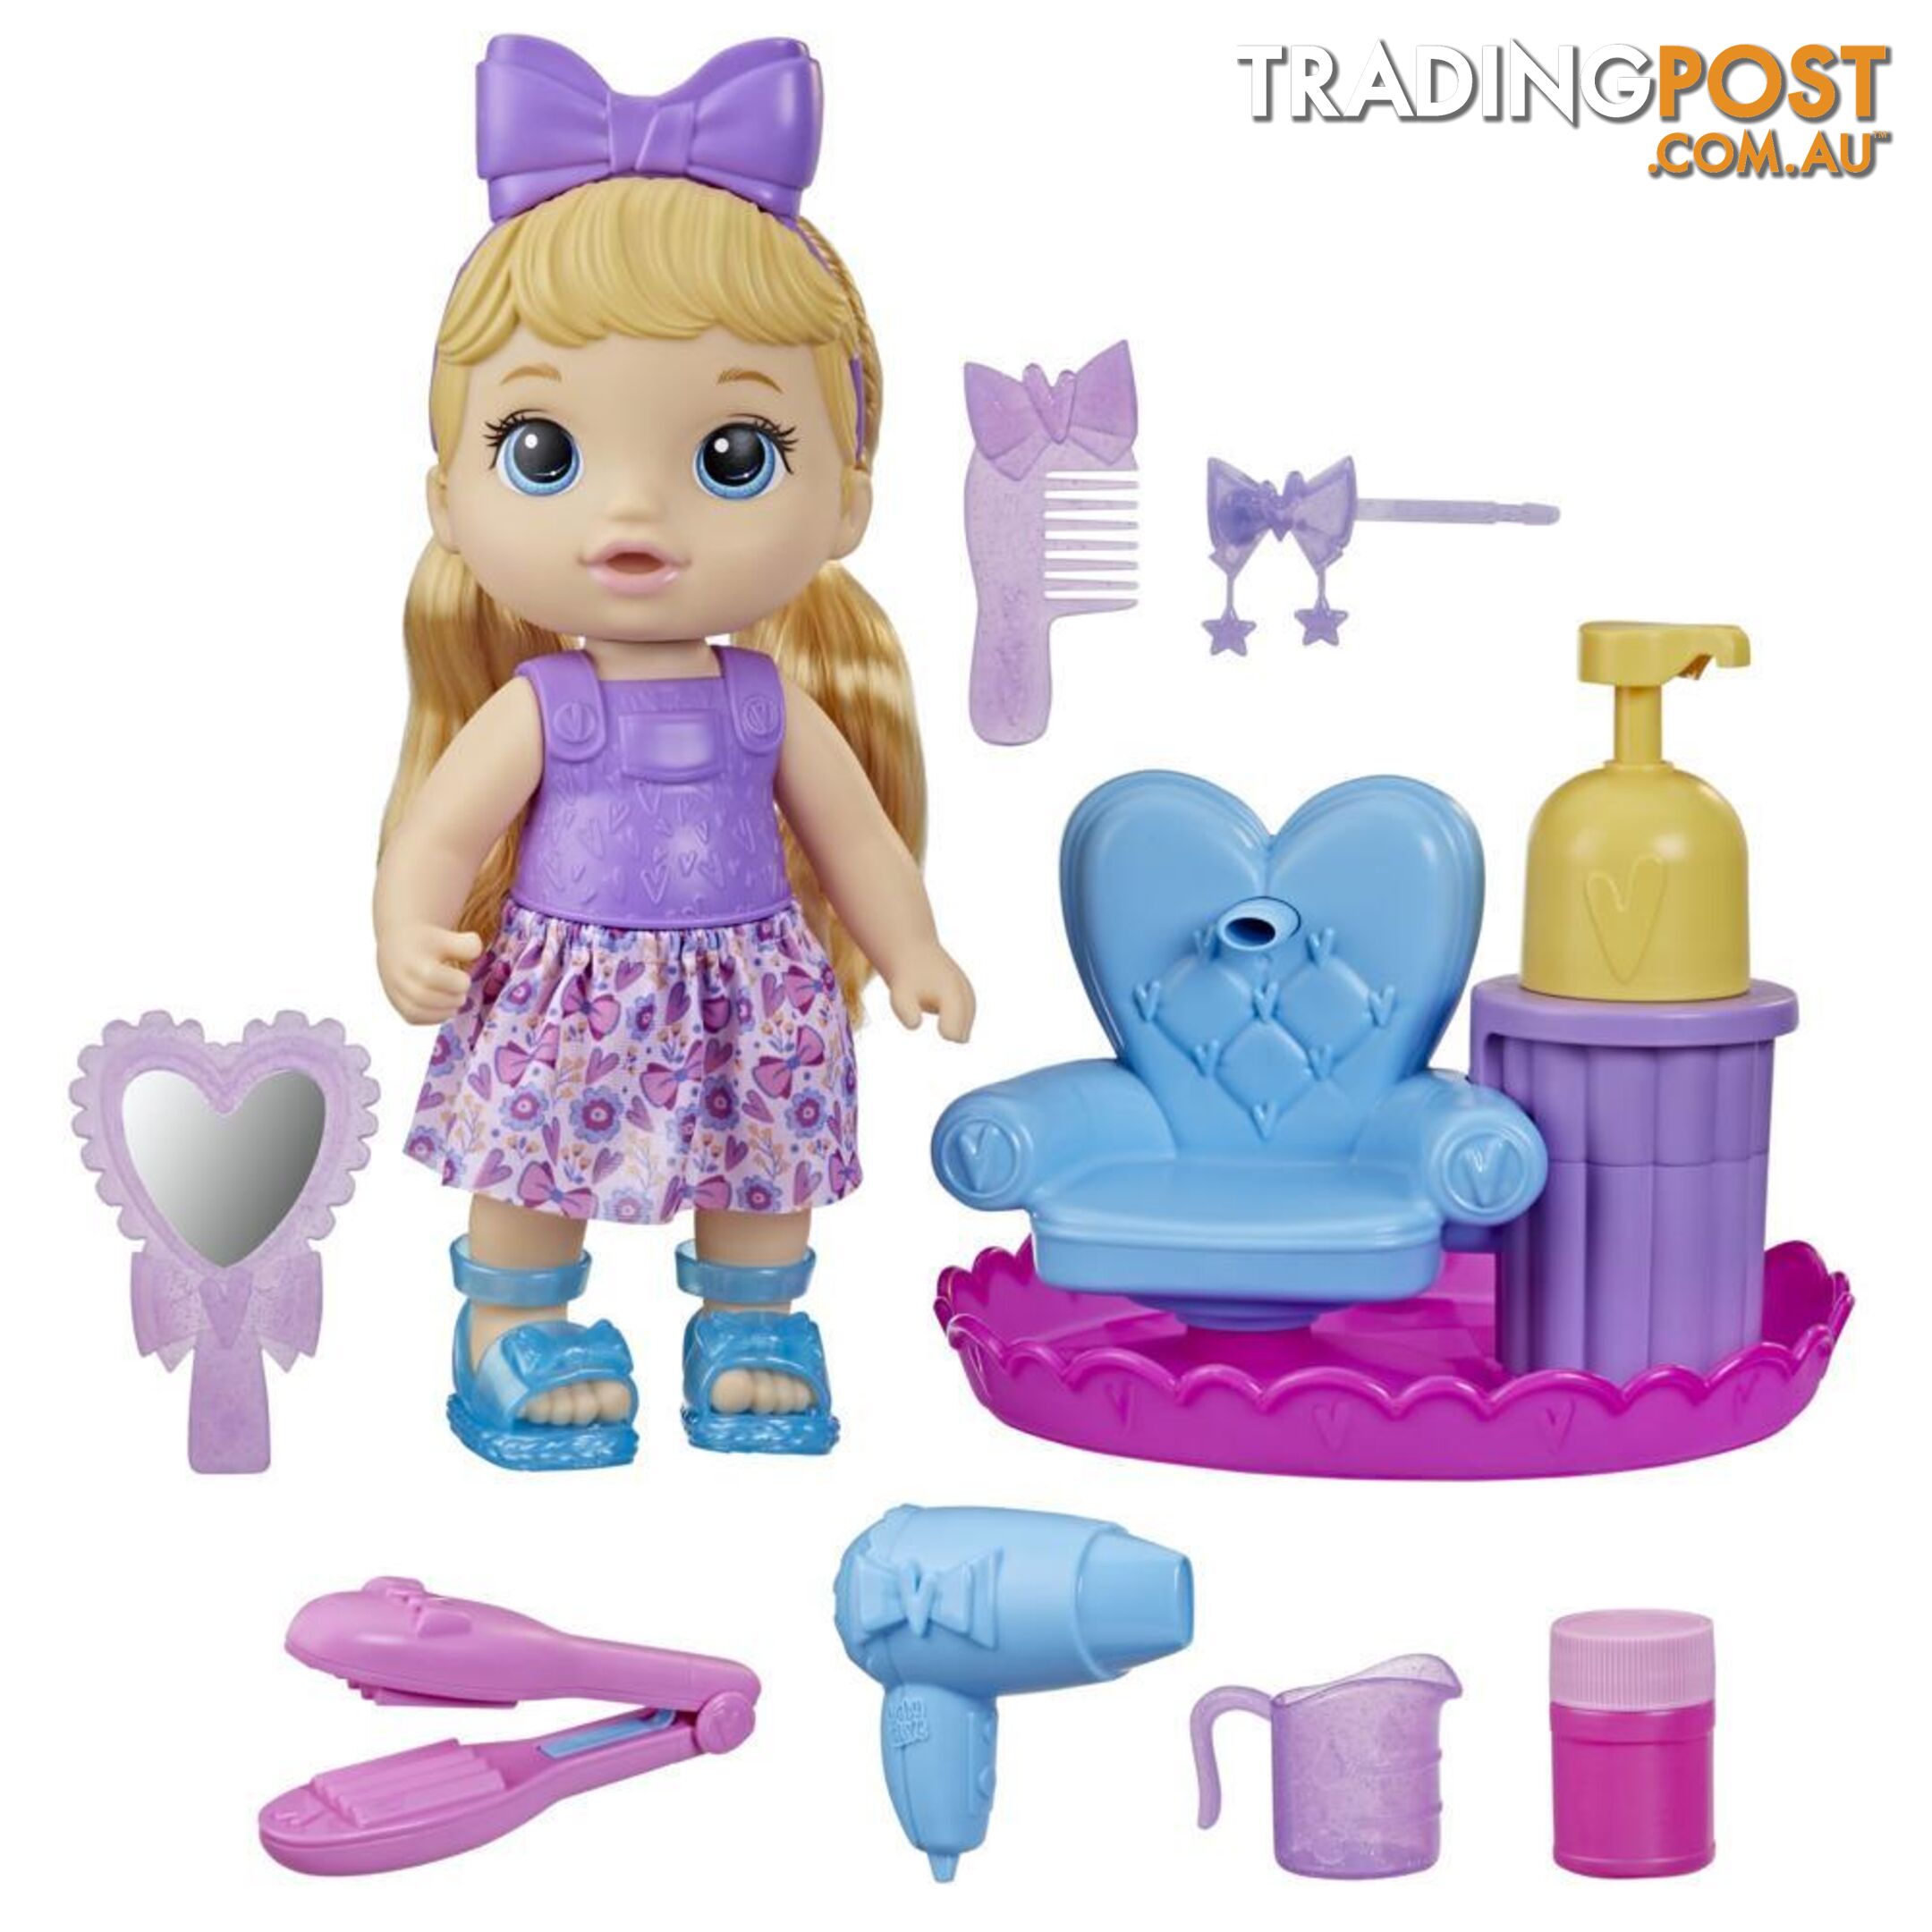 Baby Alive Sudsy Styling 12-inch Salon Baby Doll Incl Accessories Bubble Solution Hasbro - Hbf51125xoo - 5010994126896